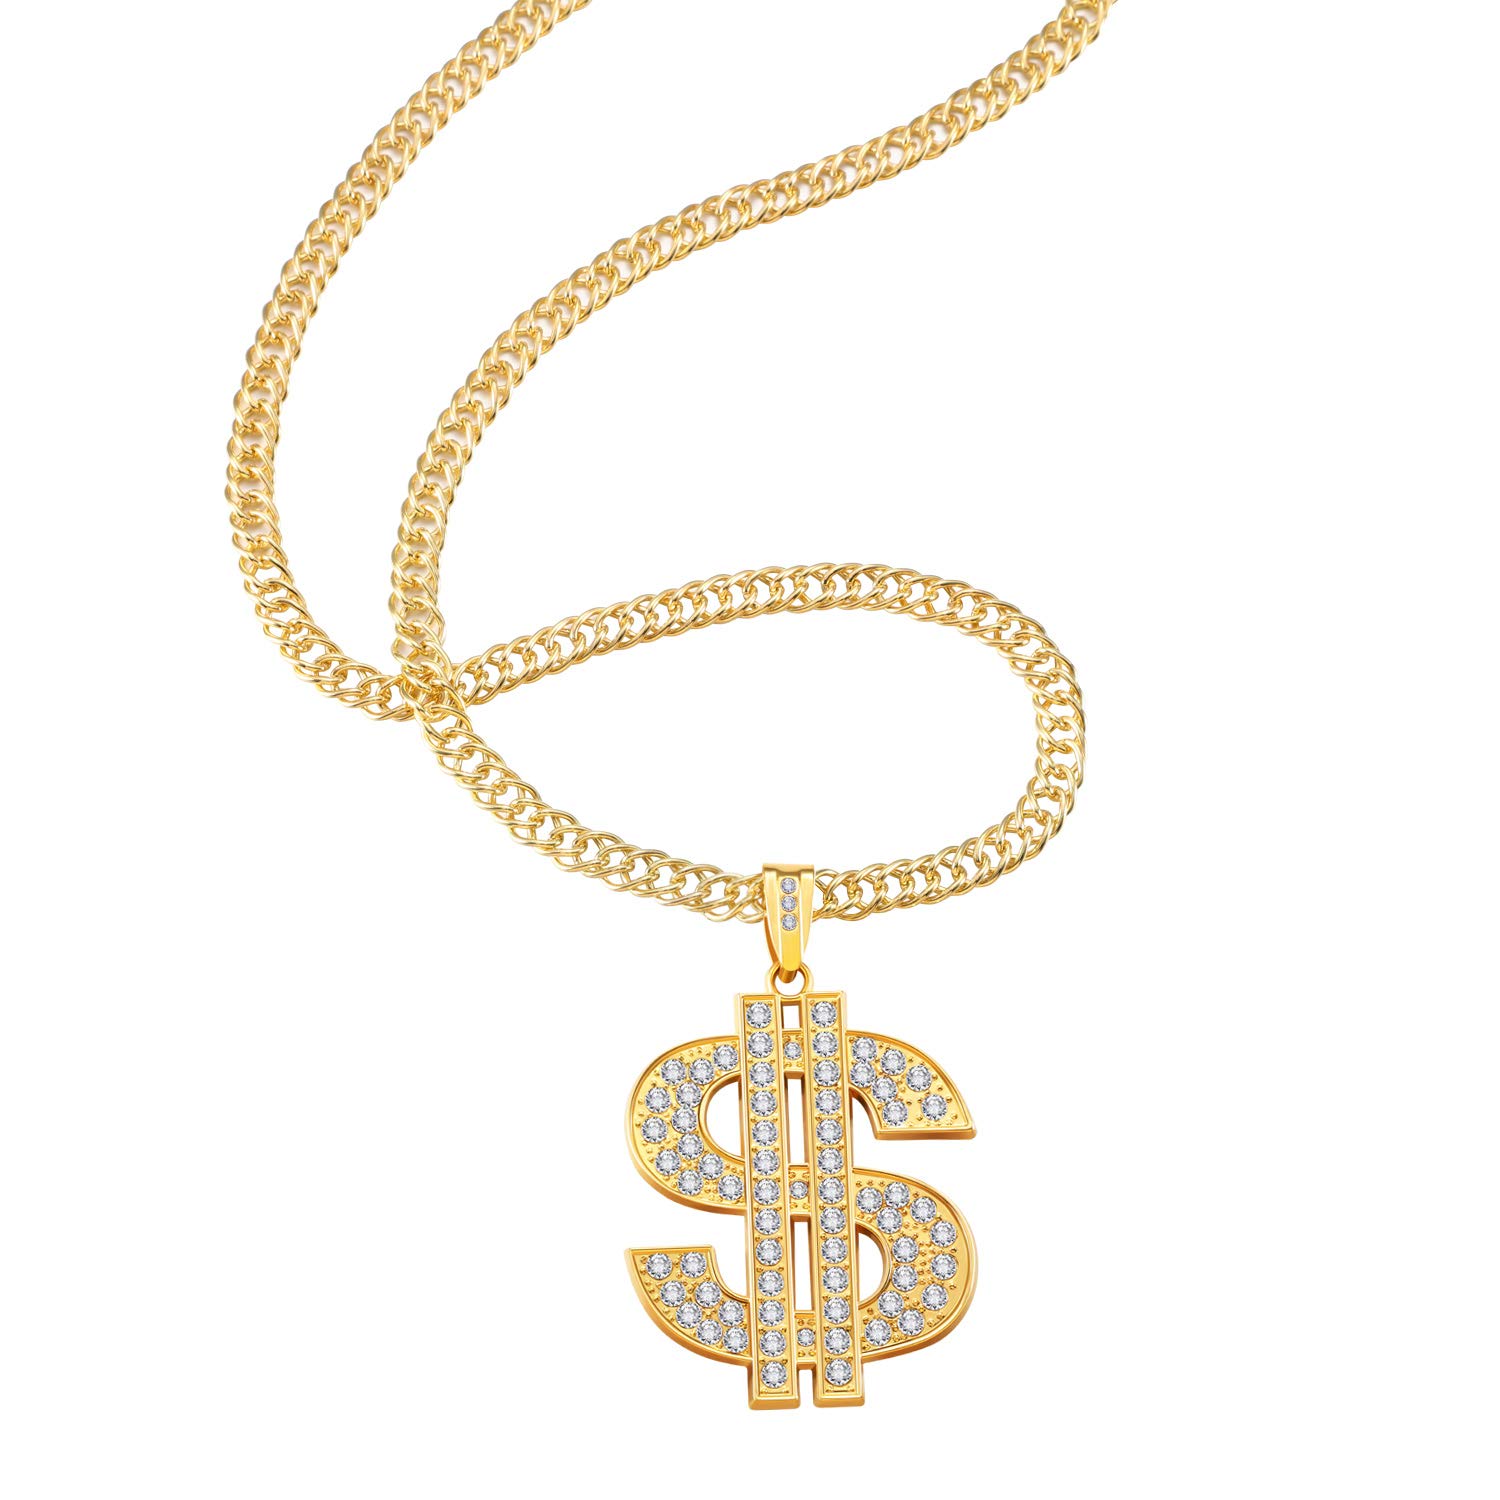 2 Pieces Plated Chain for Men with Dollar Sign Pendant Necklace, Dollar Necklace